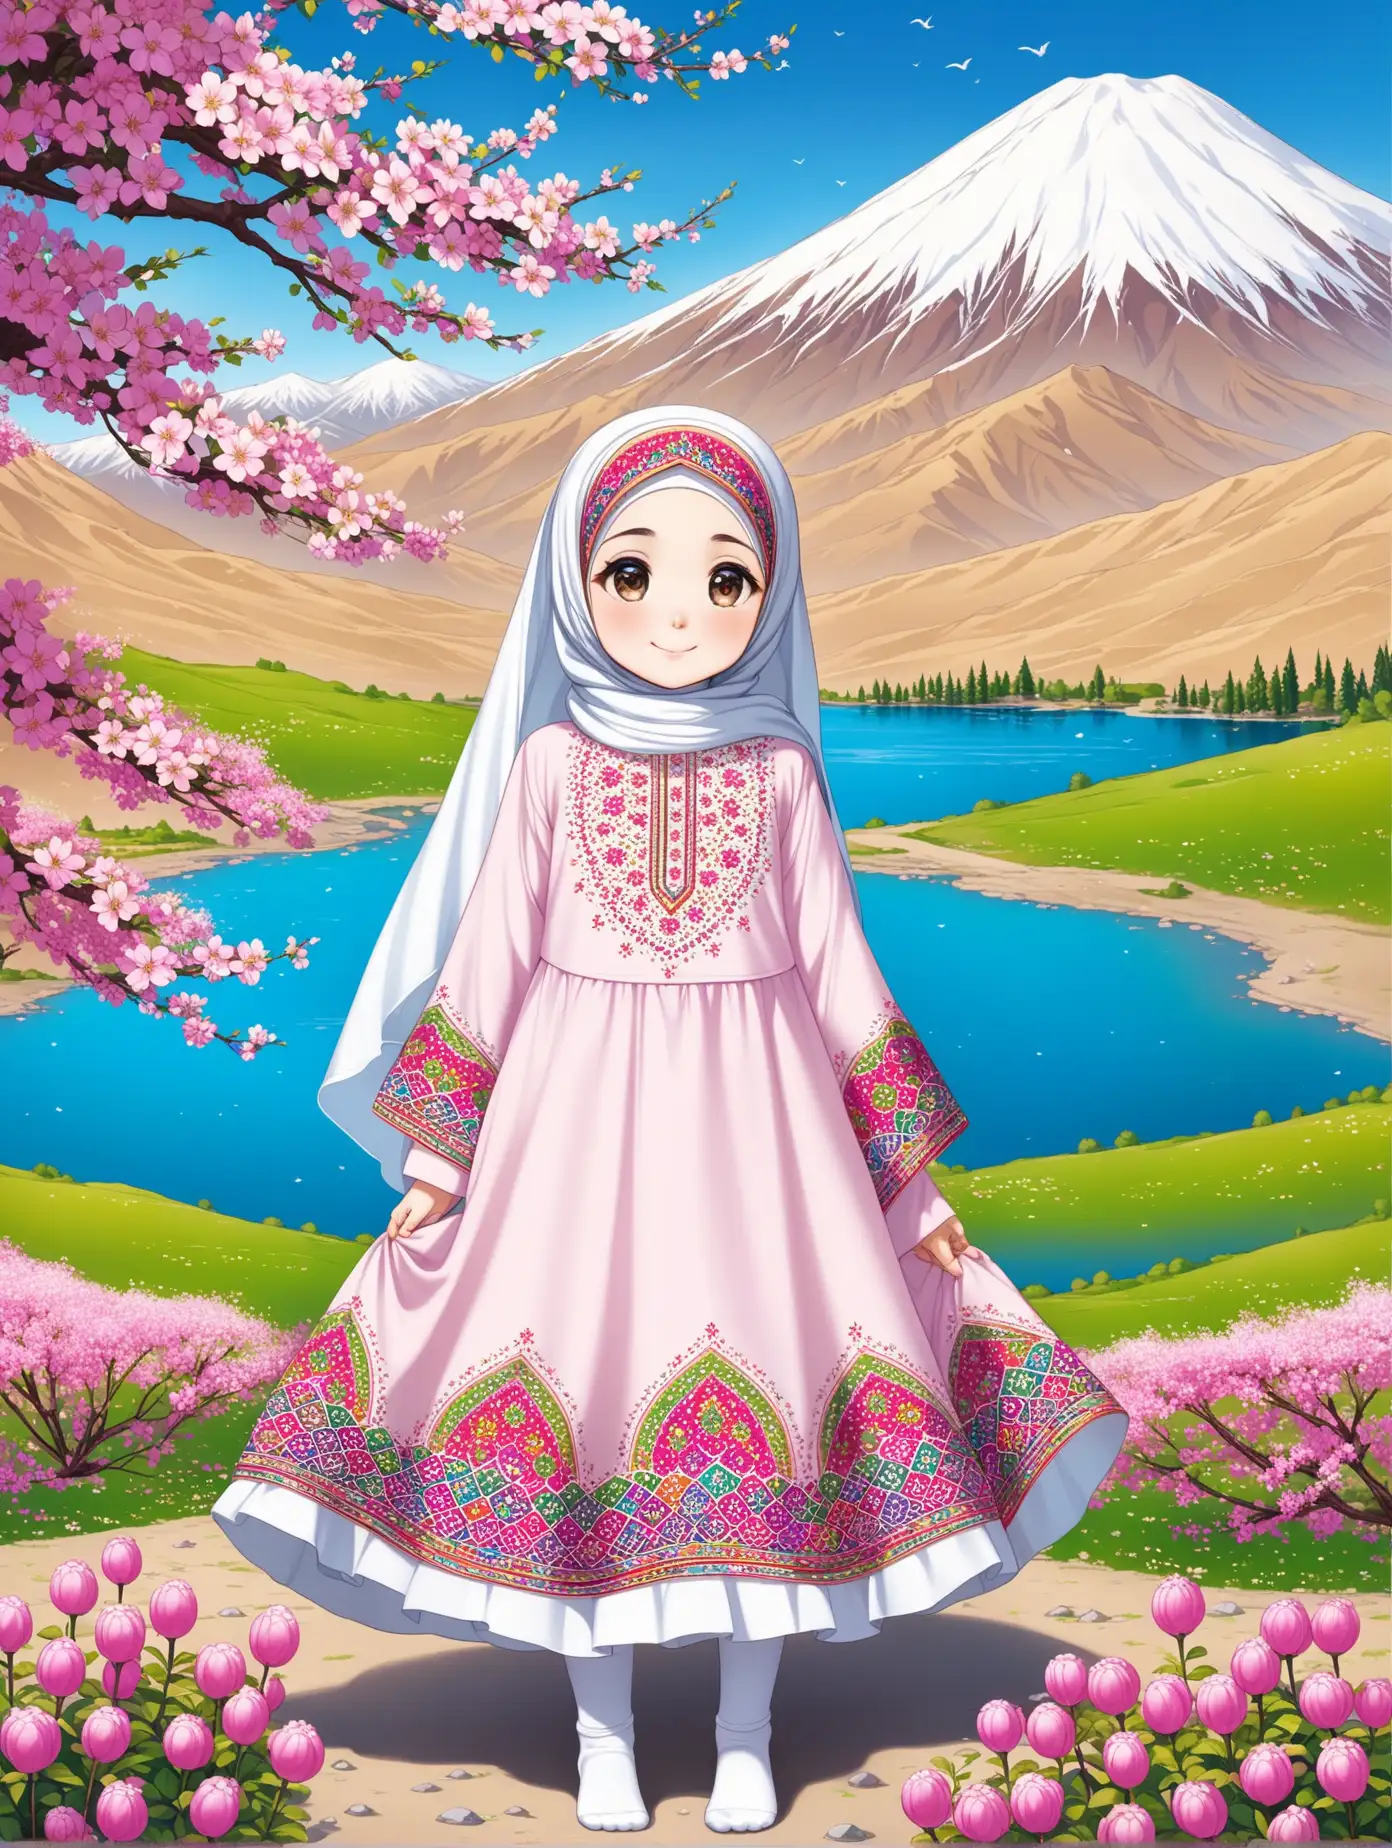 Persian little girl(full height, Muslim, with emphasis no hair nor neck out of veil(Hijab), small eyes, bigger nose, white skin, cute, smiling, wearing socks, clothes full of Persian designs).
Atmosphere Damavand mountain, proudly, pink flowers, lake, spring.